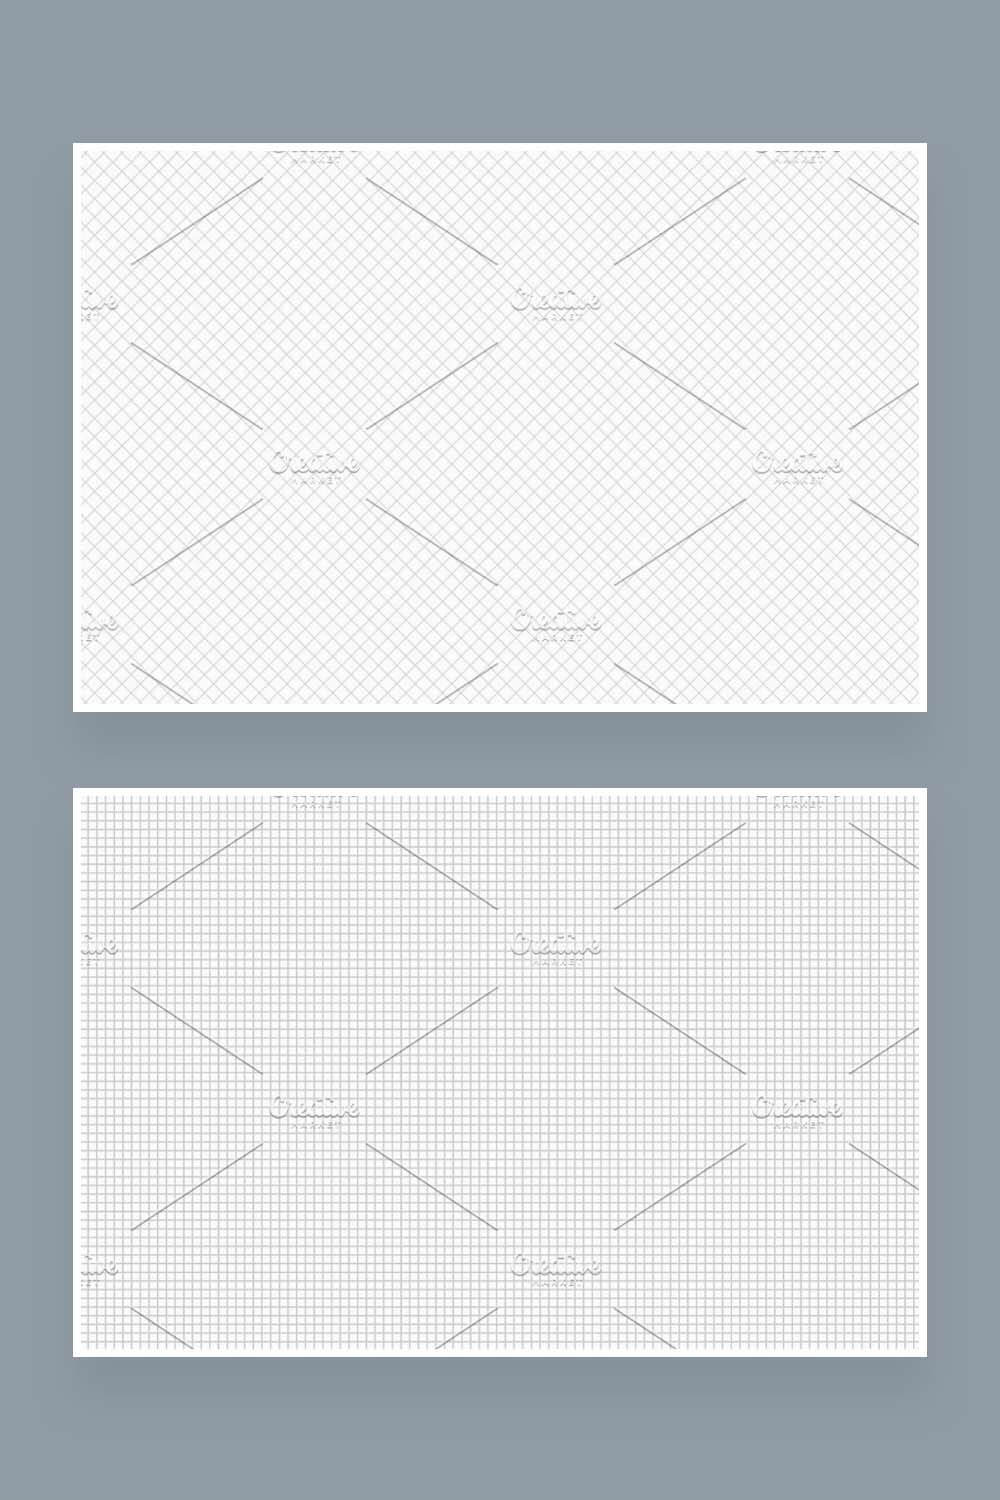 Two models of seamless paper mesh patterns, small rhombuses and small squares.